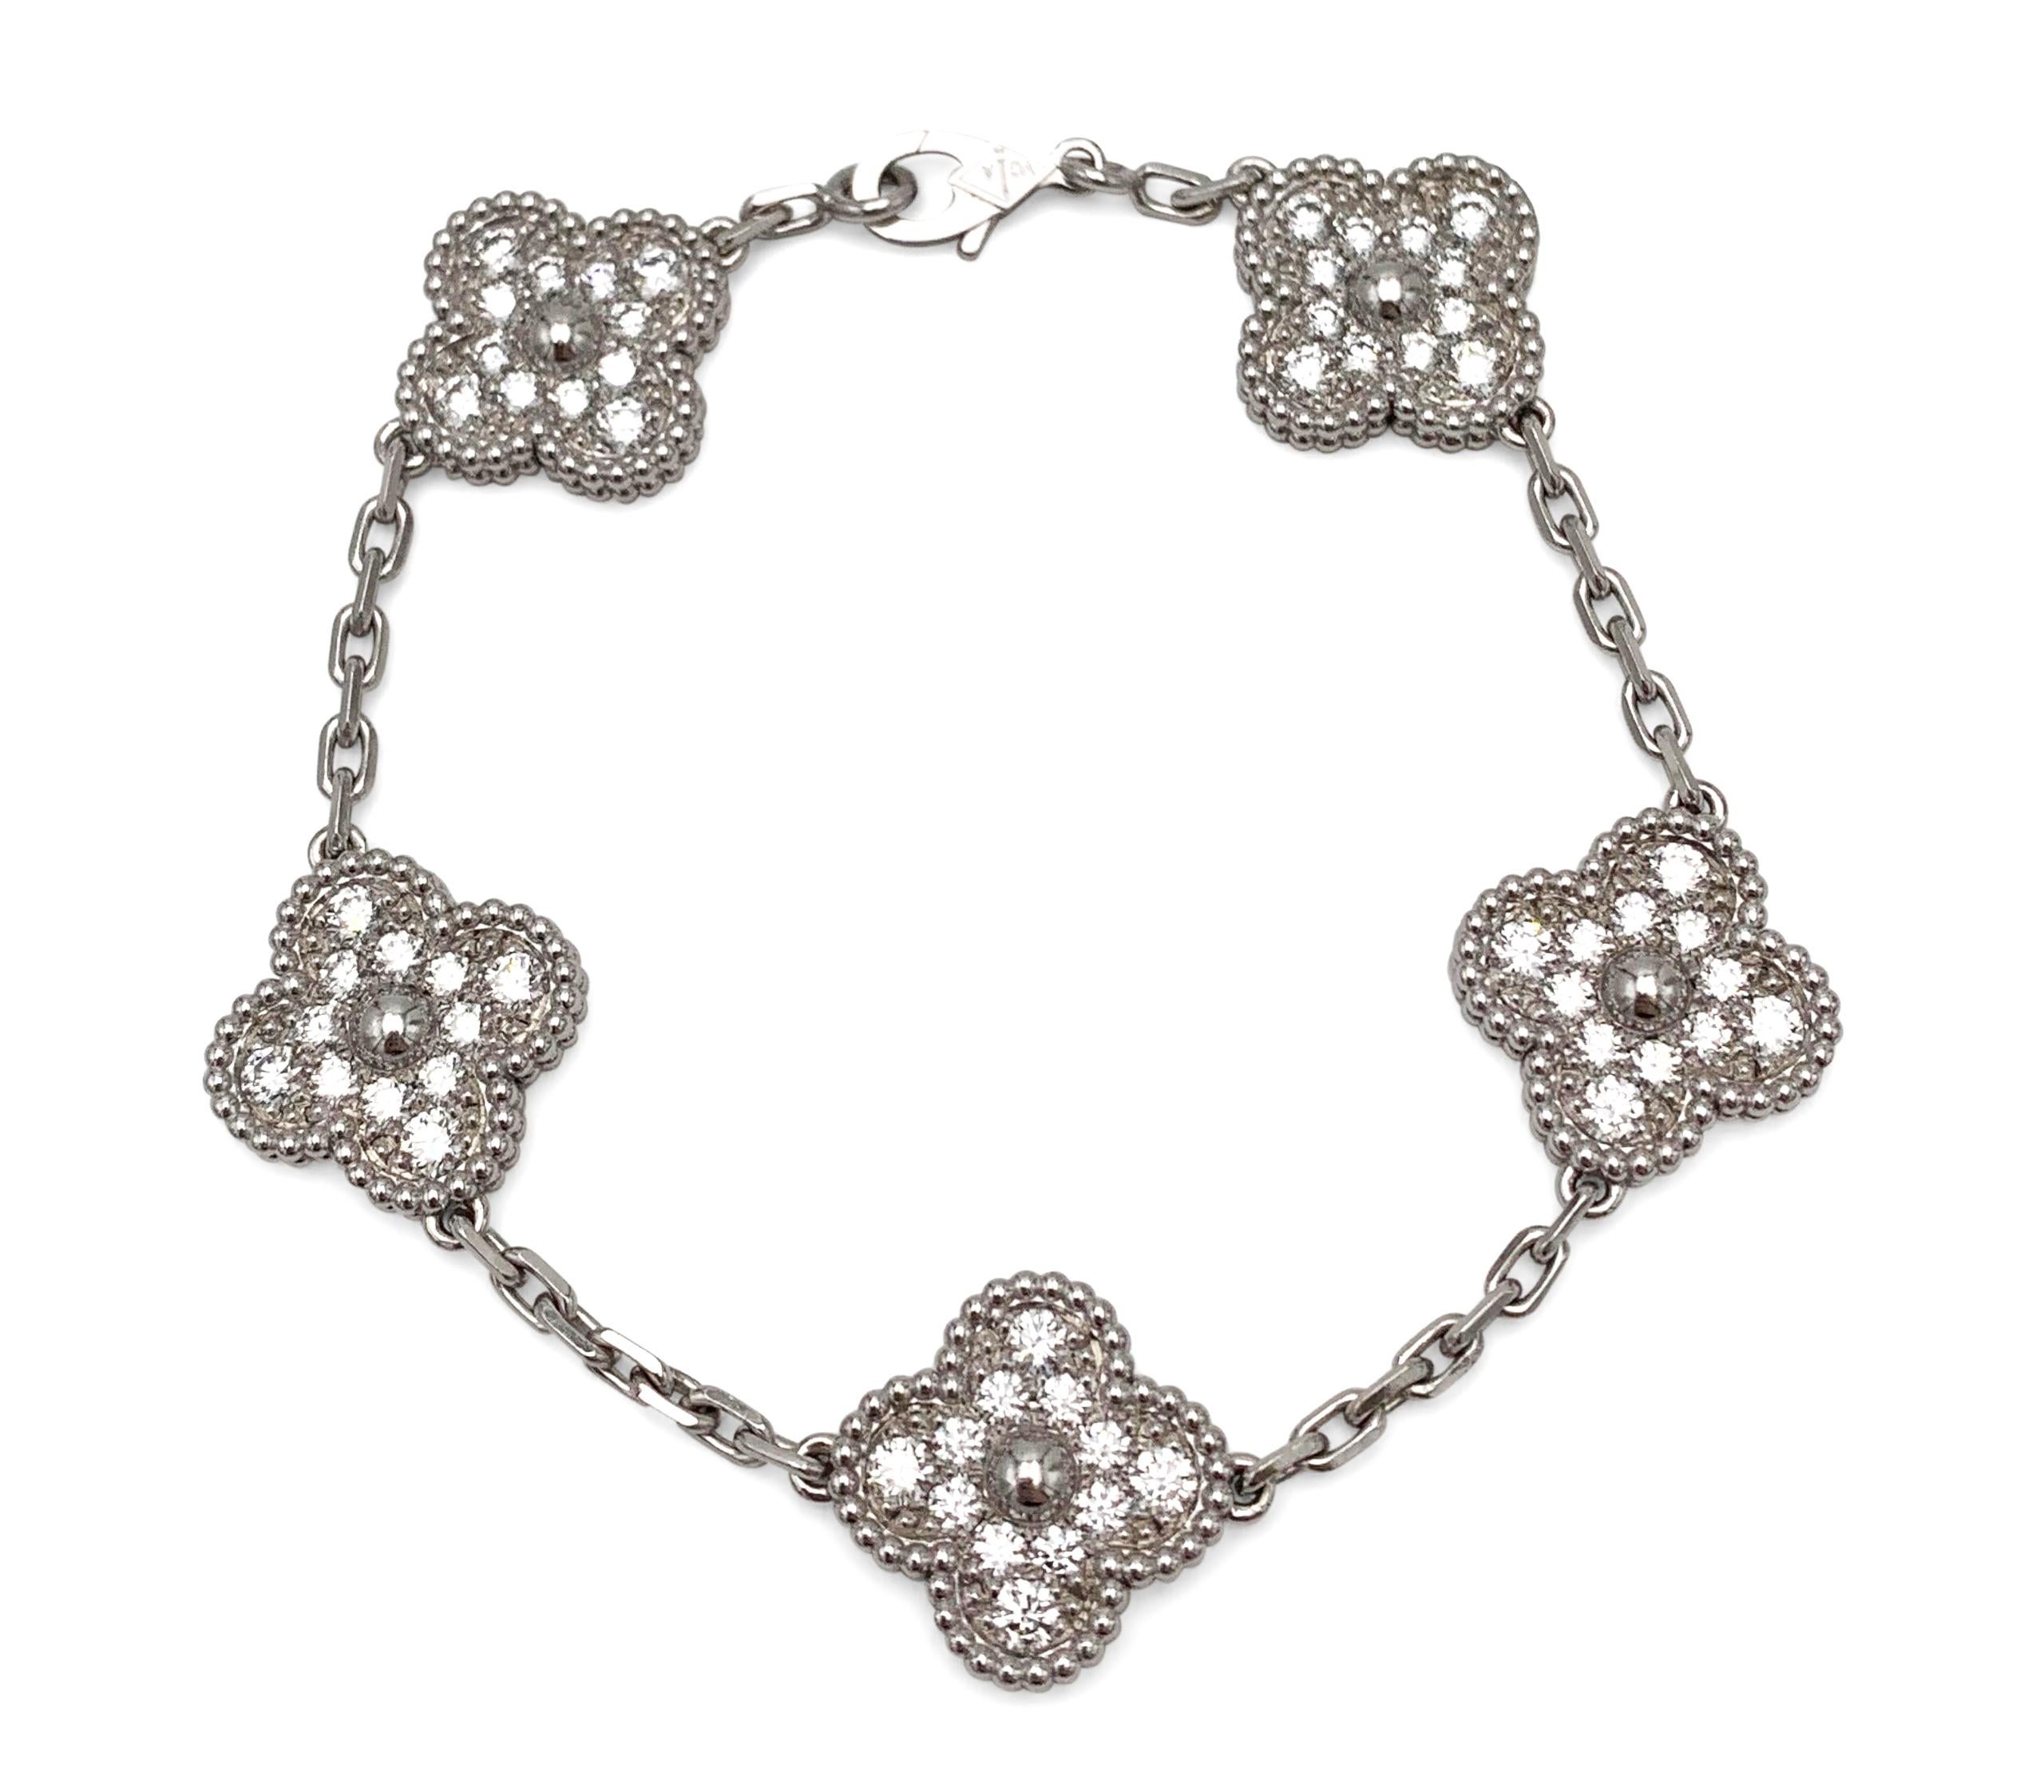 Authentic Van Cleef & Arpels Vintage Alhambra bracelet crafted in 18 karat white gold and set with approximately 60 diamonds, weighing an estimated 1.80 cttw.  The bracelet measures  6.5 inches in length.  Signed VCA, Au750, with serial number and